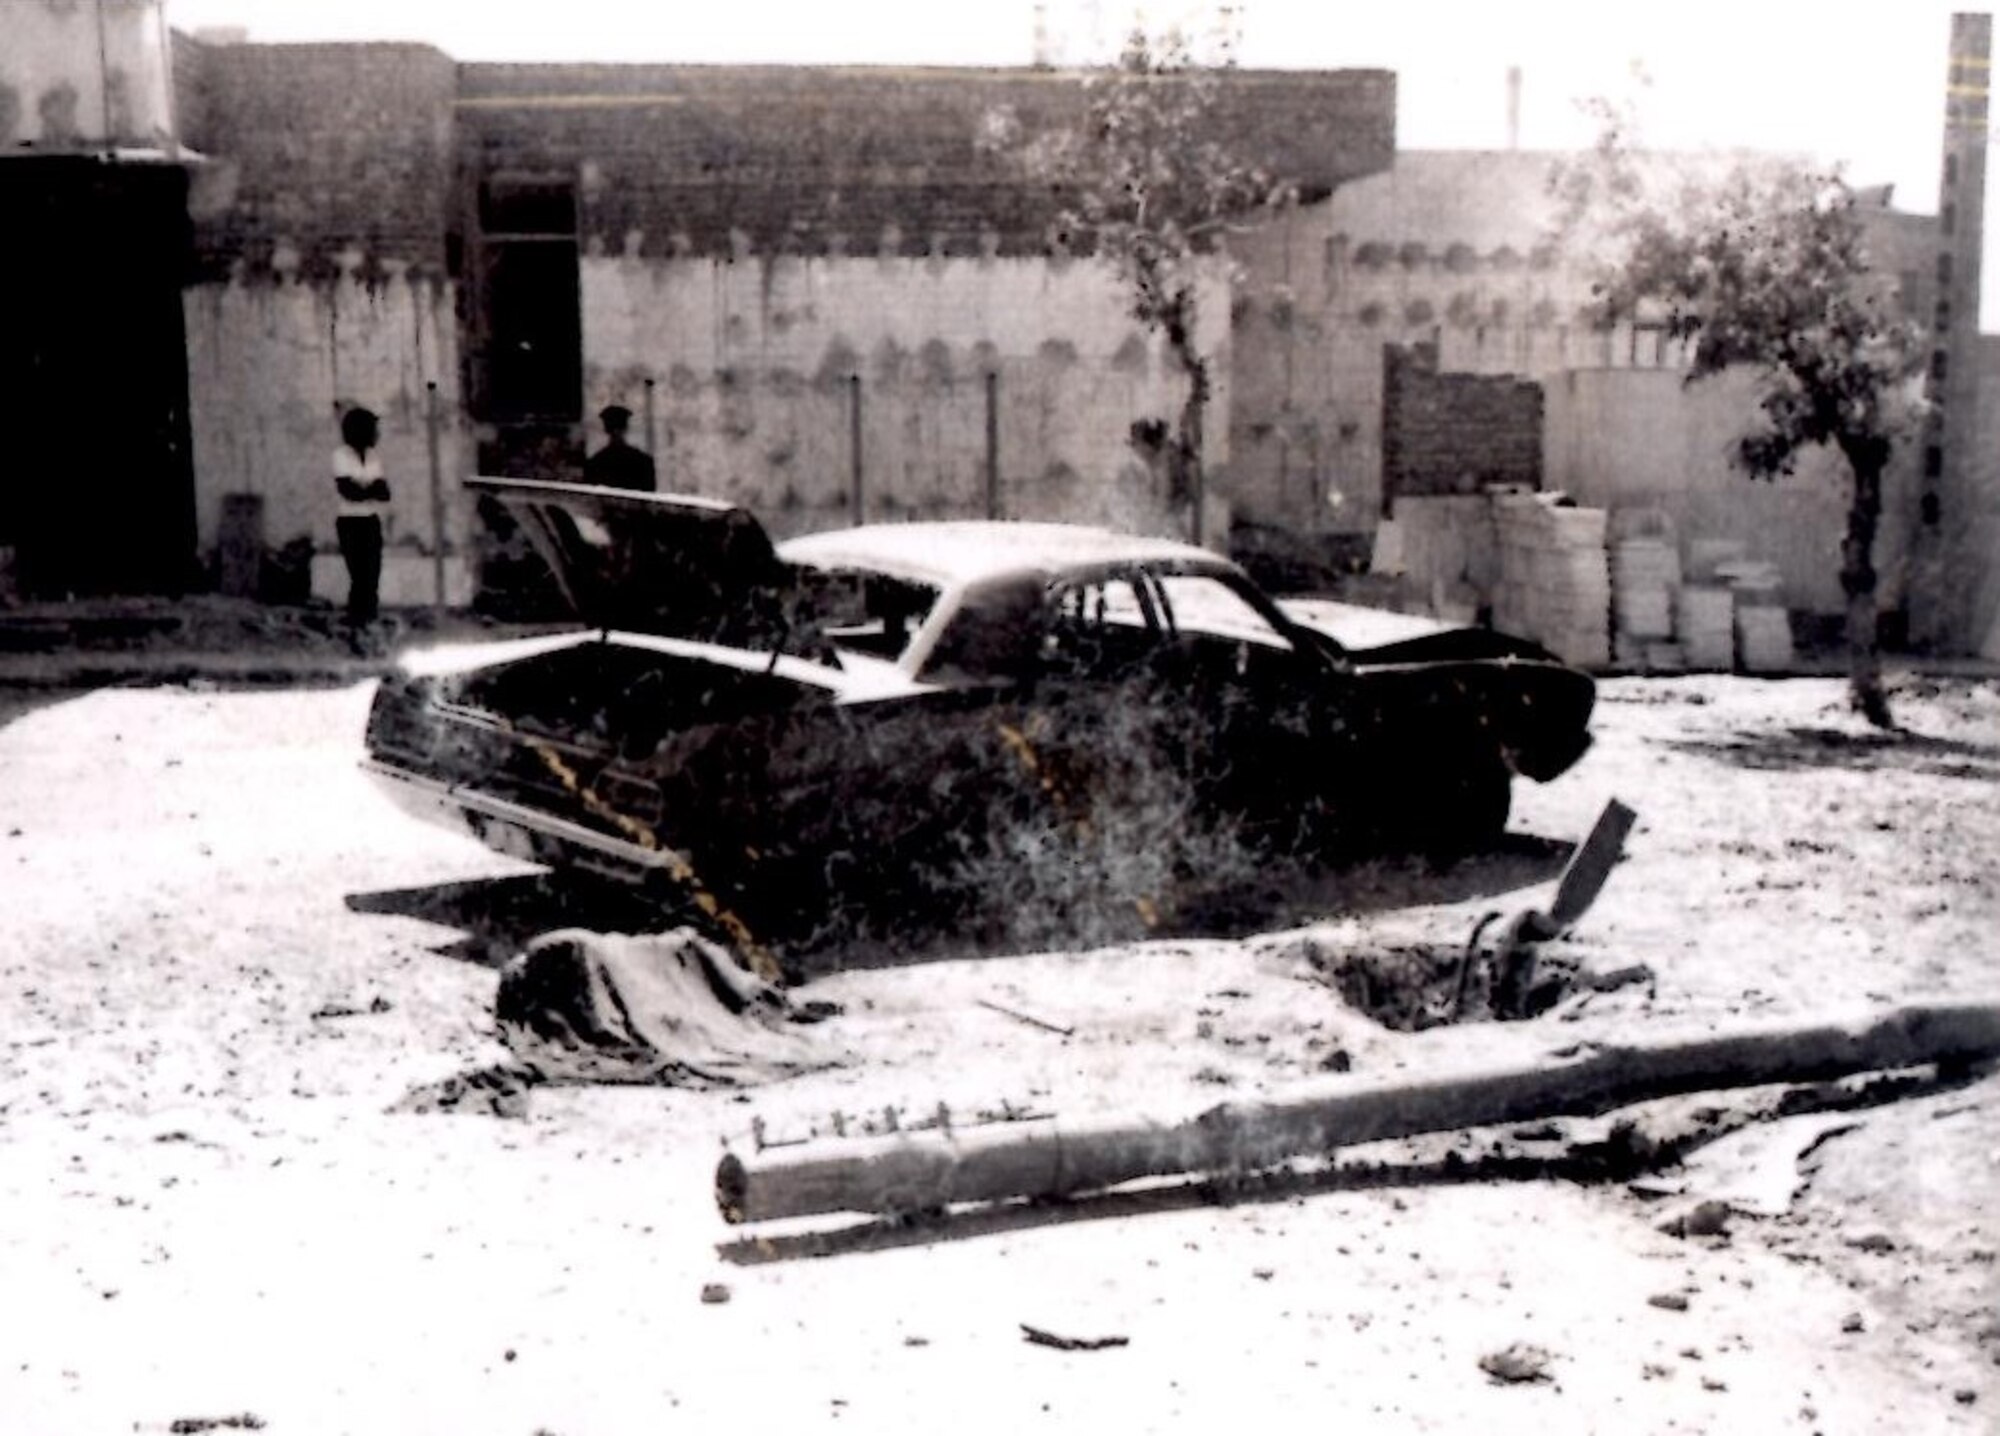 Now retired, Col.(Special Agent) Richard F. Law was on scene in Tehran, Iran, for two early 1970s assassination plots against U.S. military personnel, here capturing an image from one crime scene. (Courtesy photo)